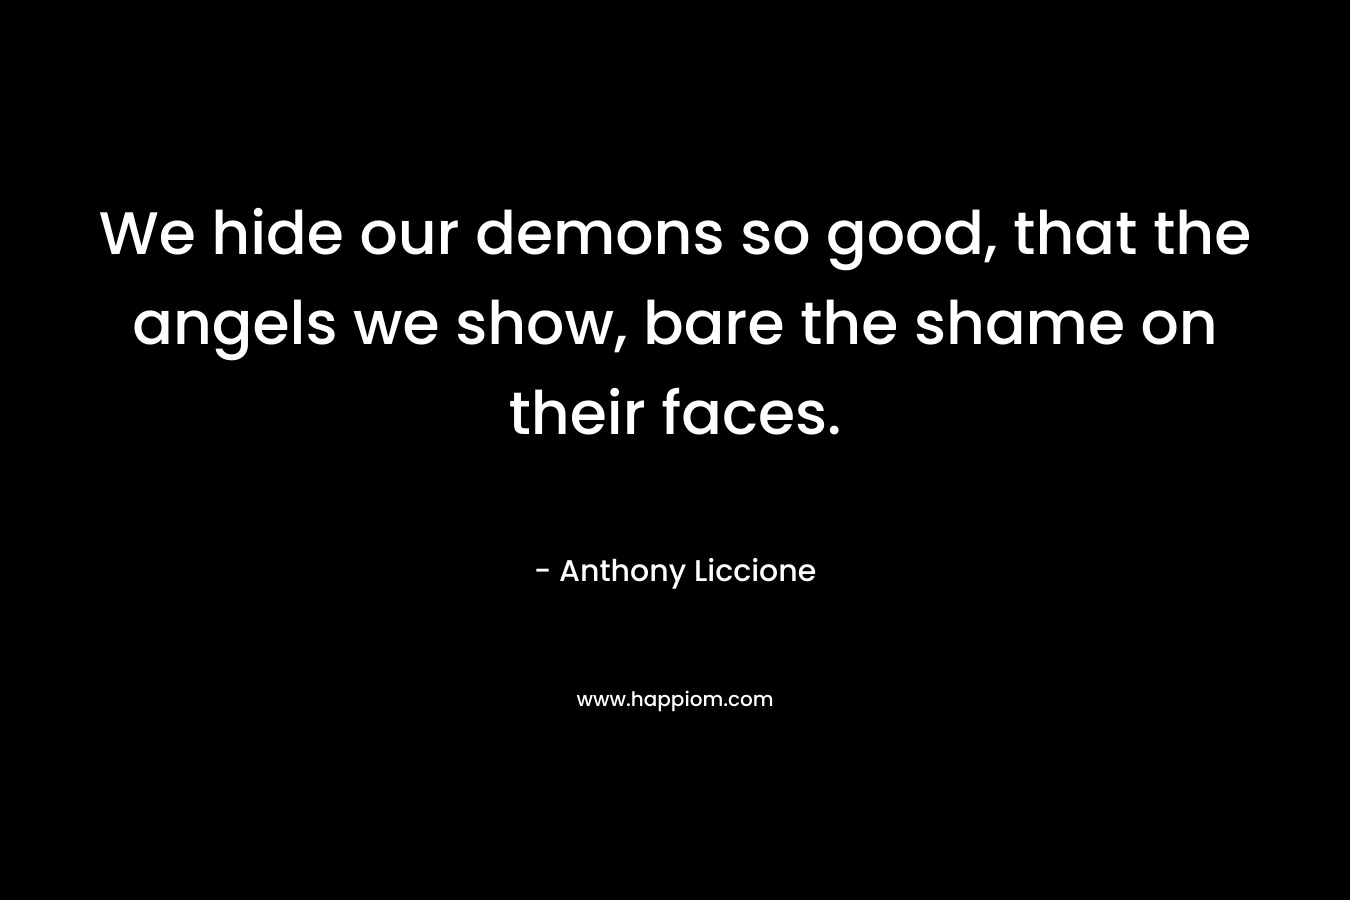 We hide our demons so good, that the angels we show, bare the shame on their faces.